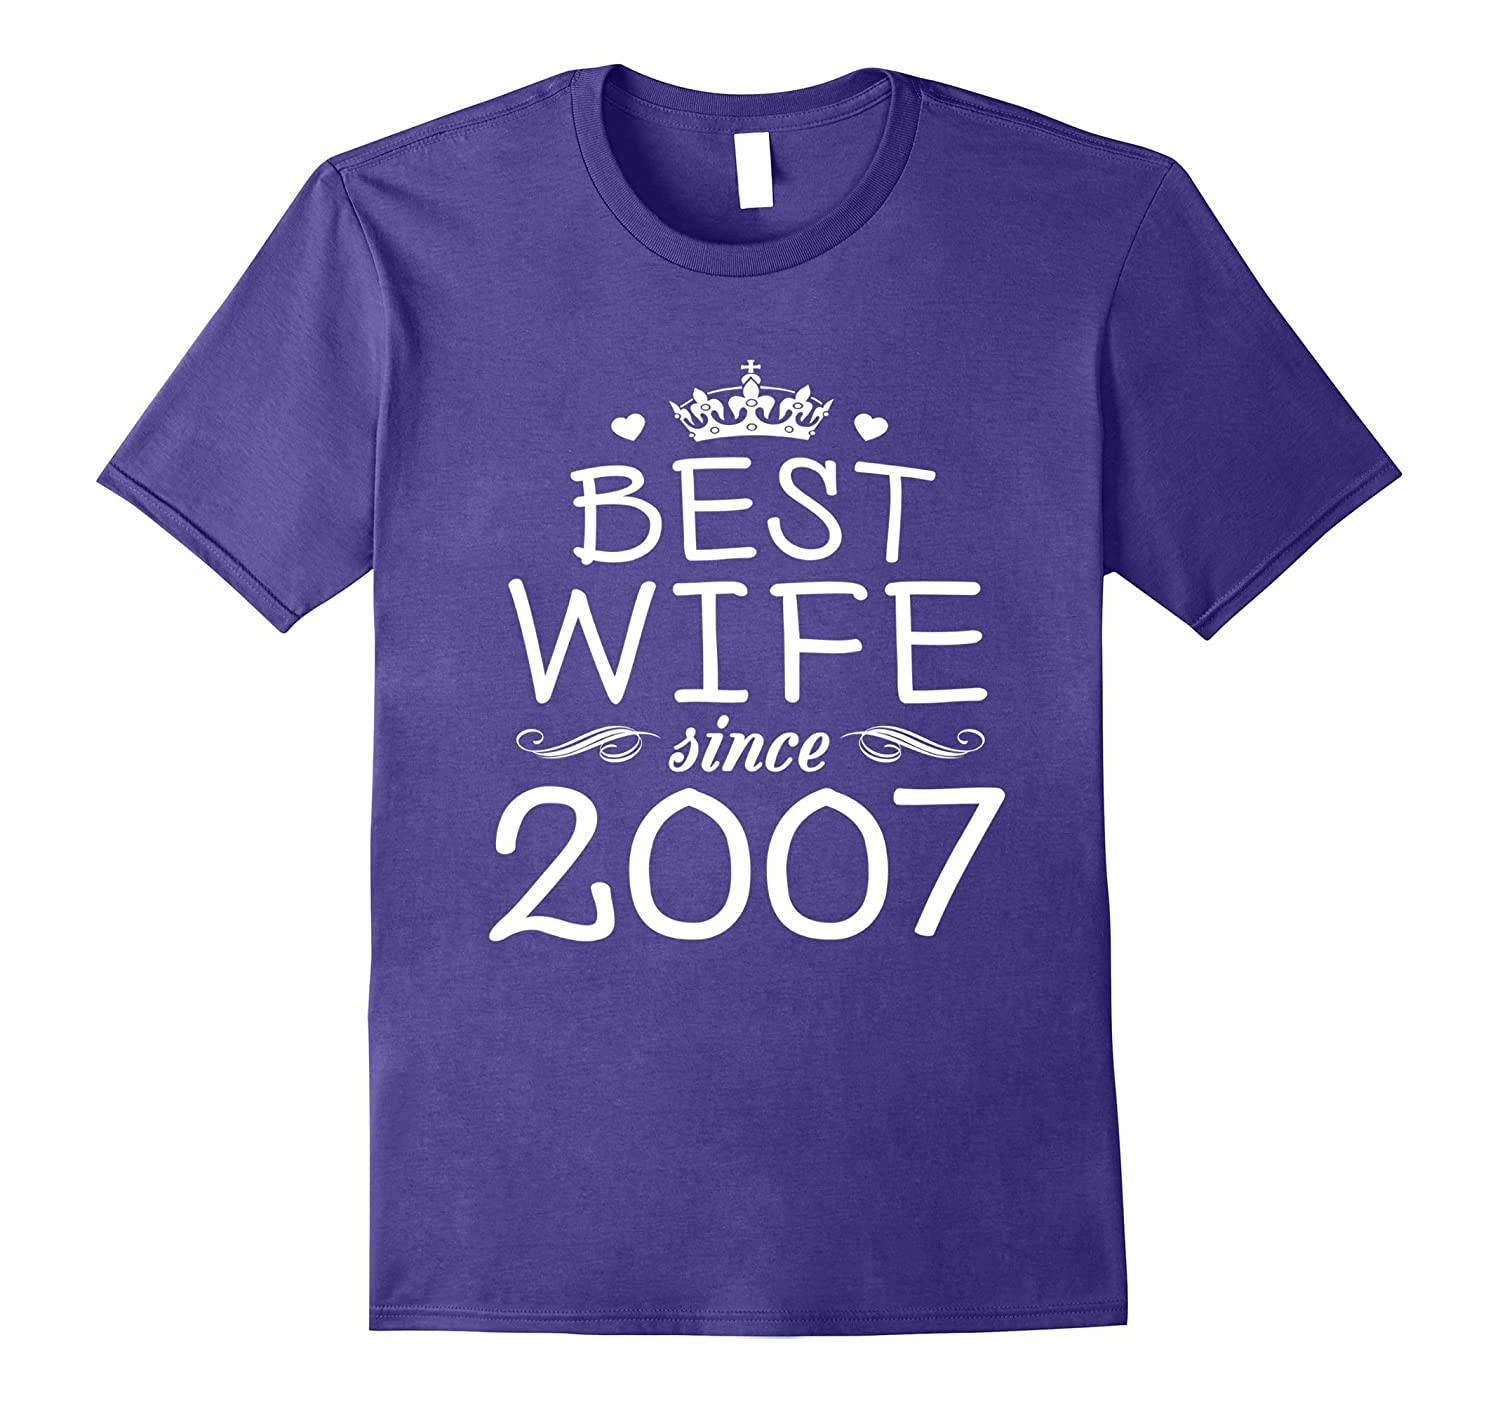 10Th Anniversary Gift Ideas For Her
 10th Wedding Anniversary Gift Ideas For Her Wife Since